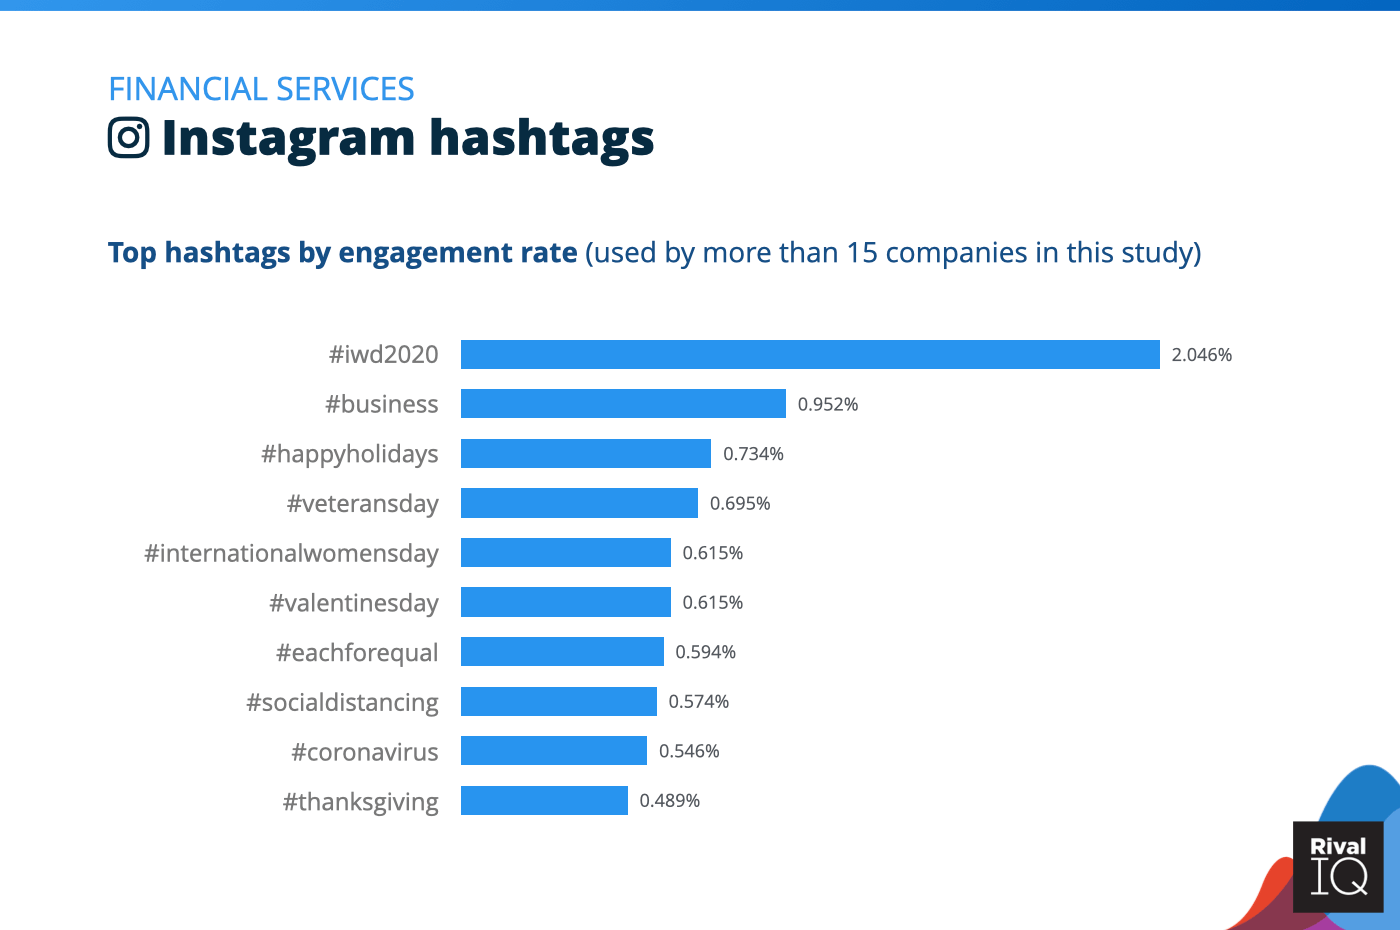 Chart of Top Instagram hashtags by engagement rate, Financial Services